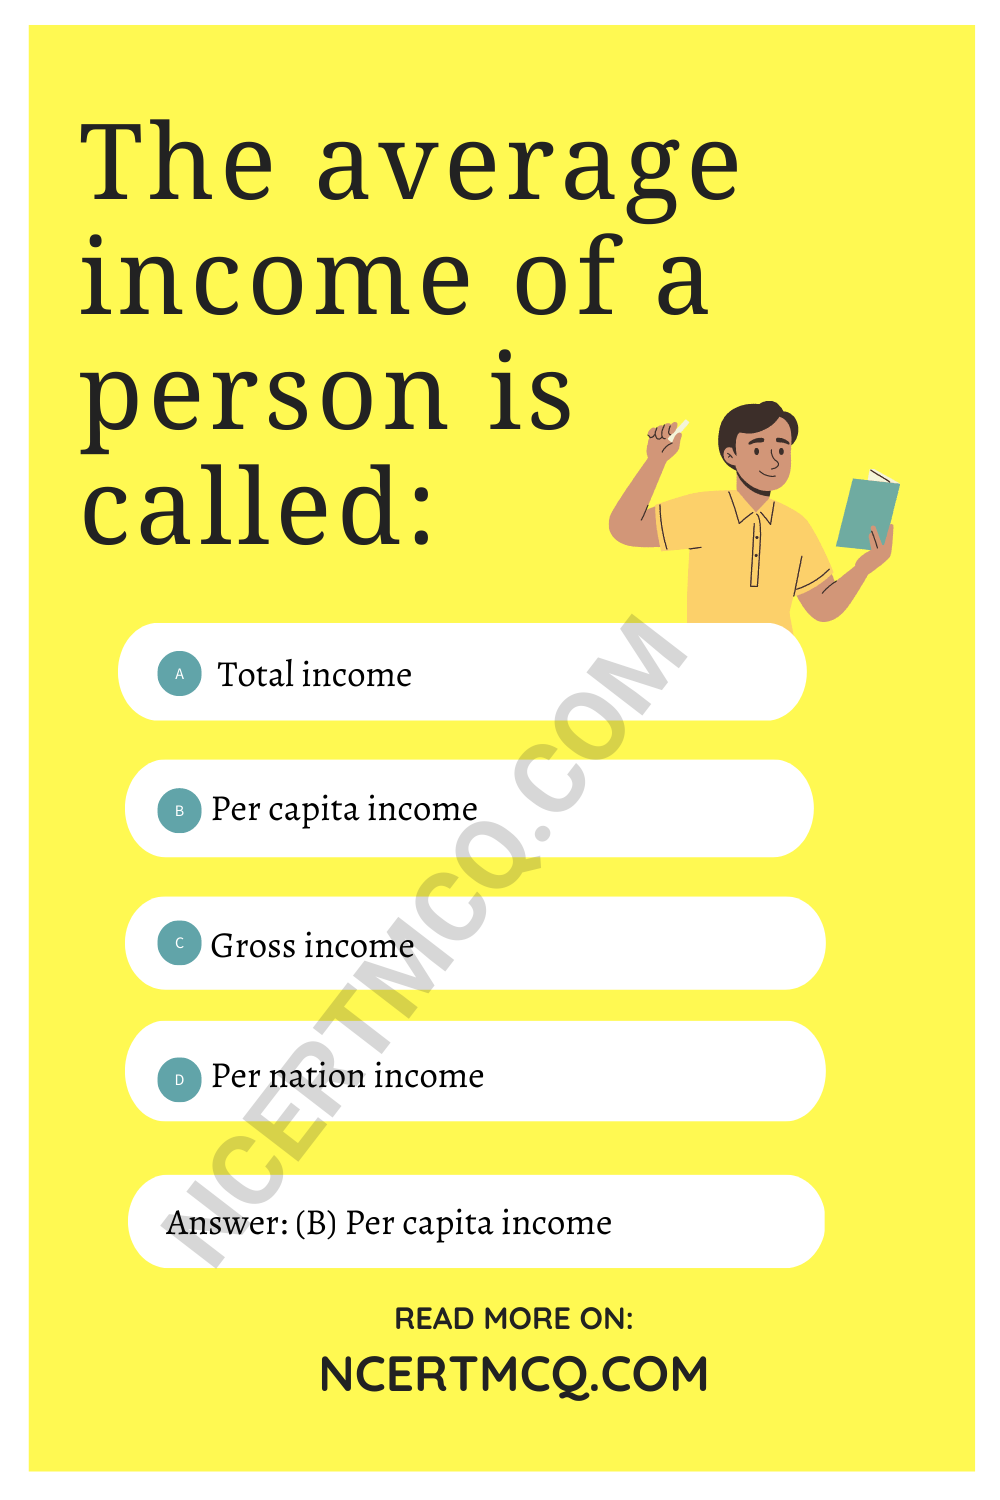 The average income of a person is called: